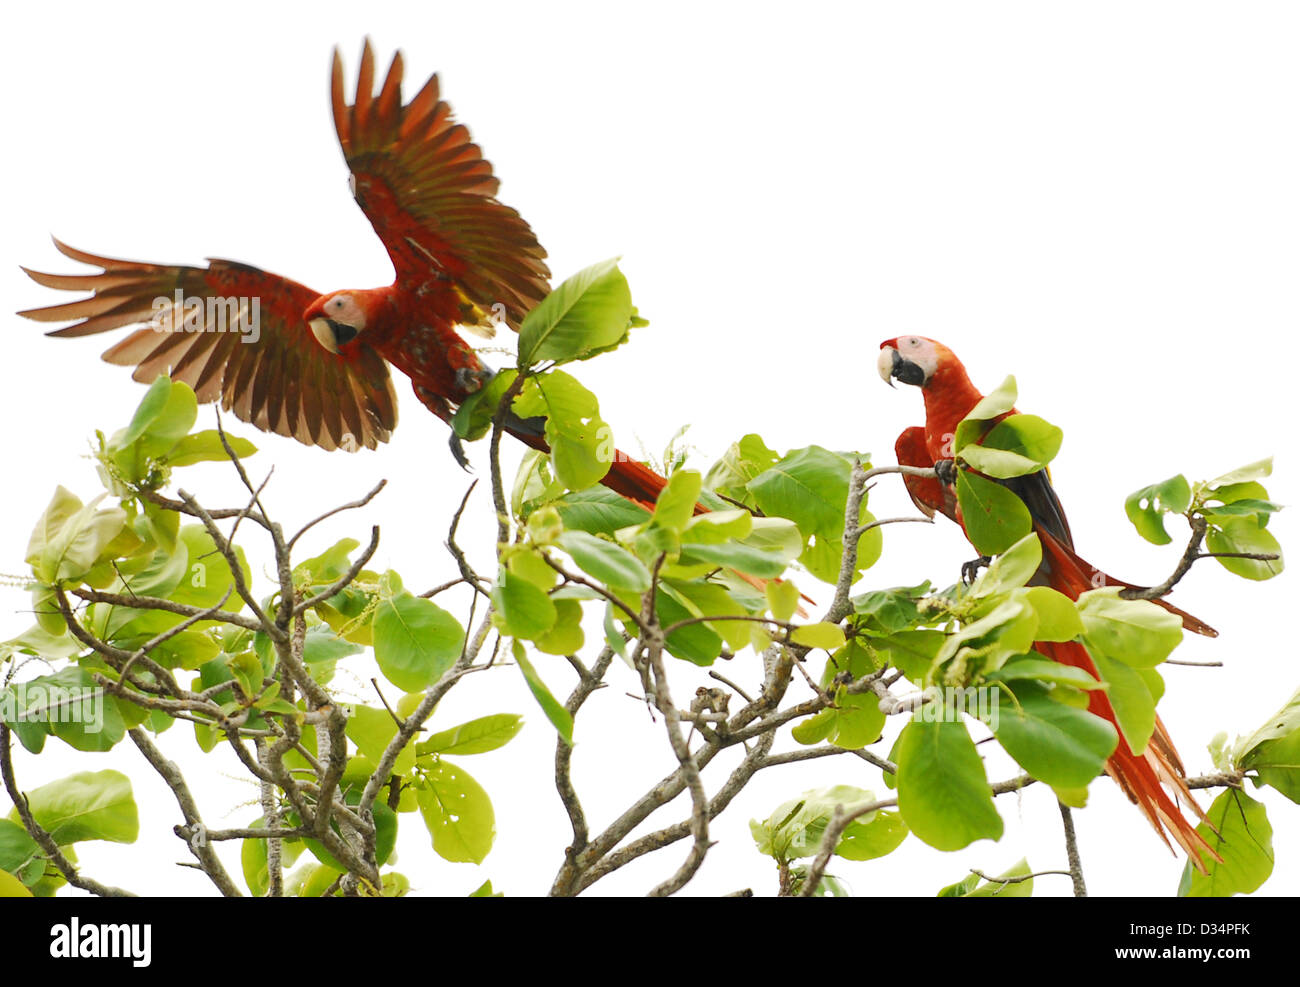 Parrots flying away from tree in Costa Rica Stock Photo